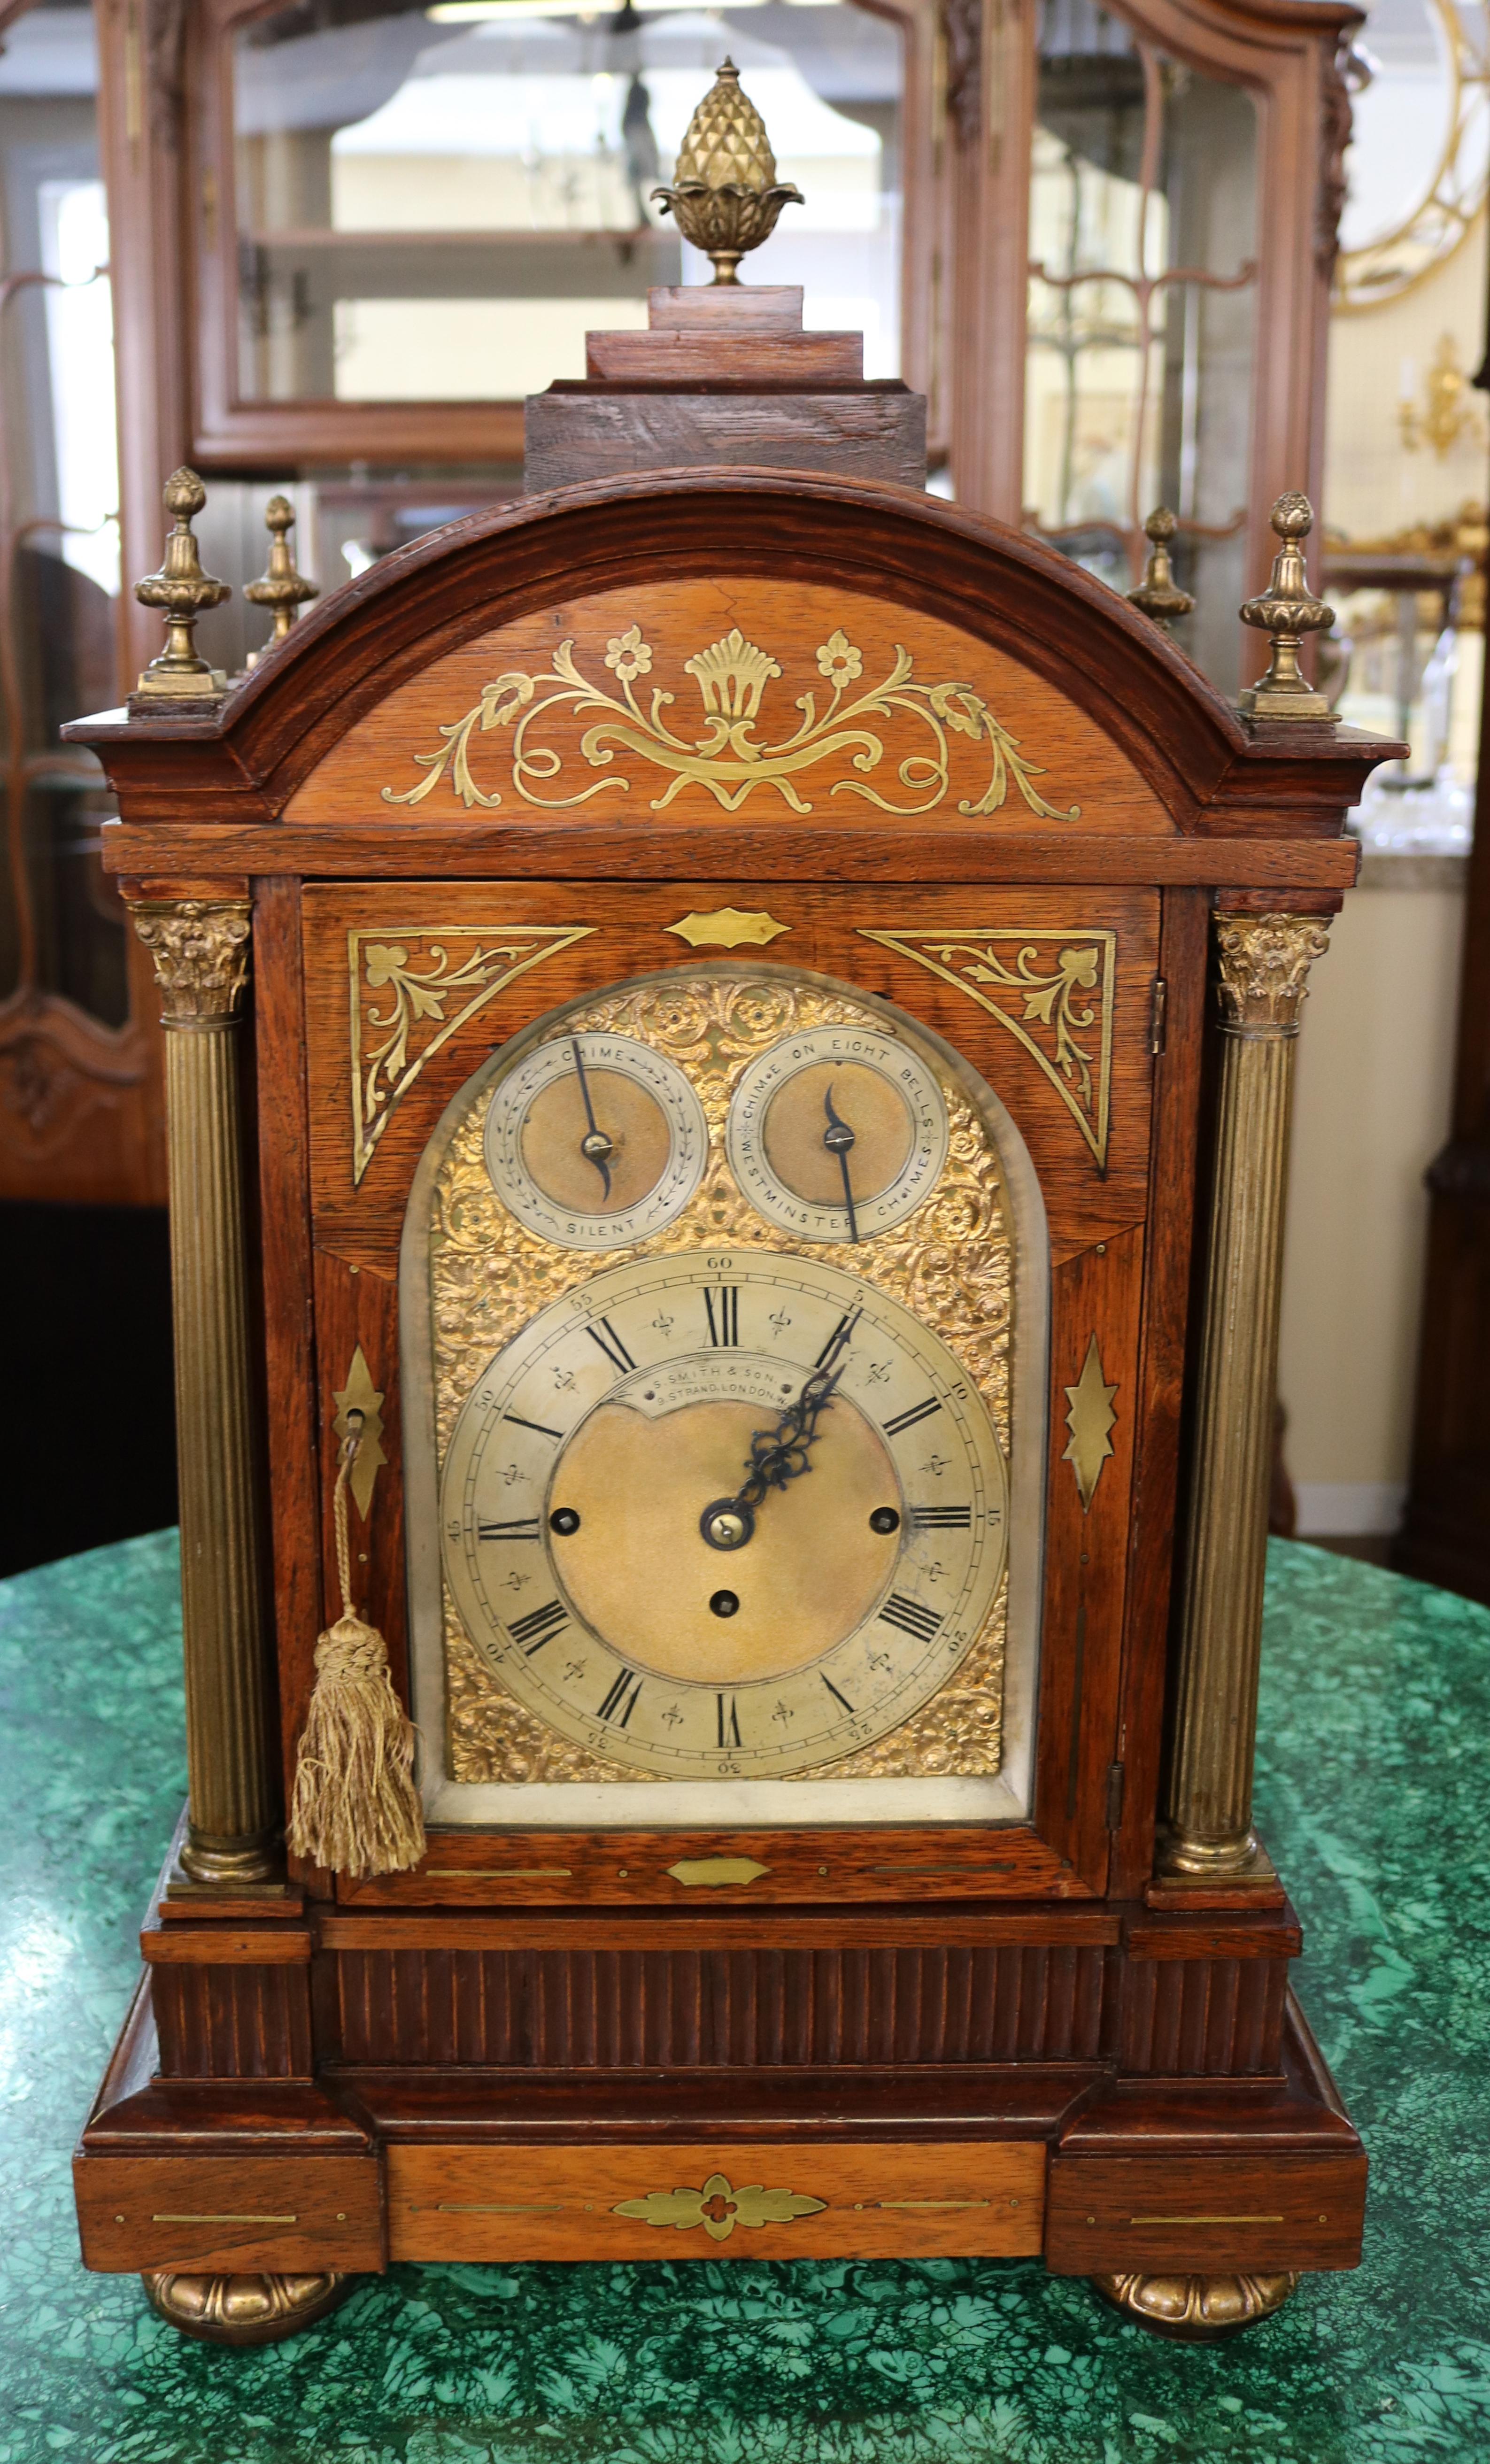 ​19th Century Rosewood Musical Mantel Bracket Clock By S. Smith & Sons London

Dimensions : 29